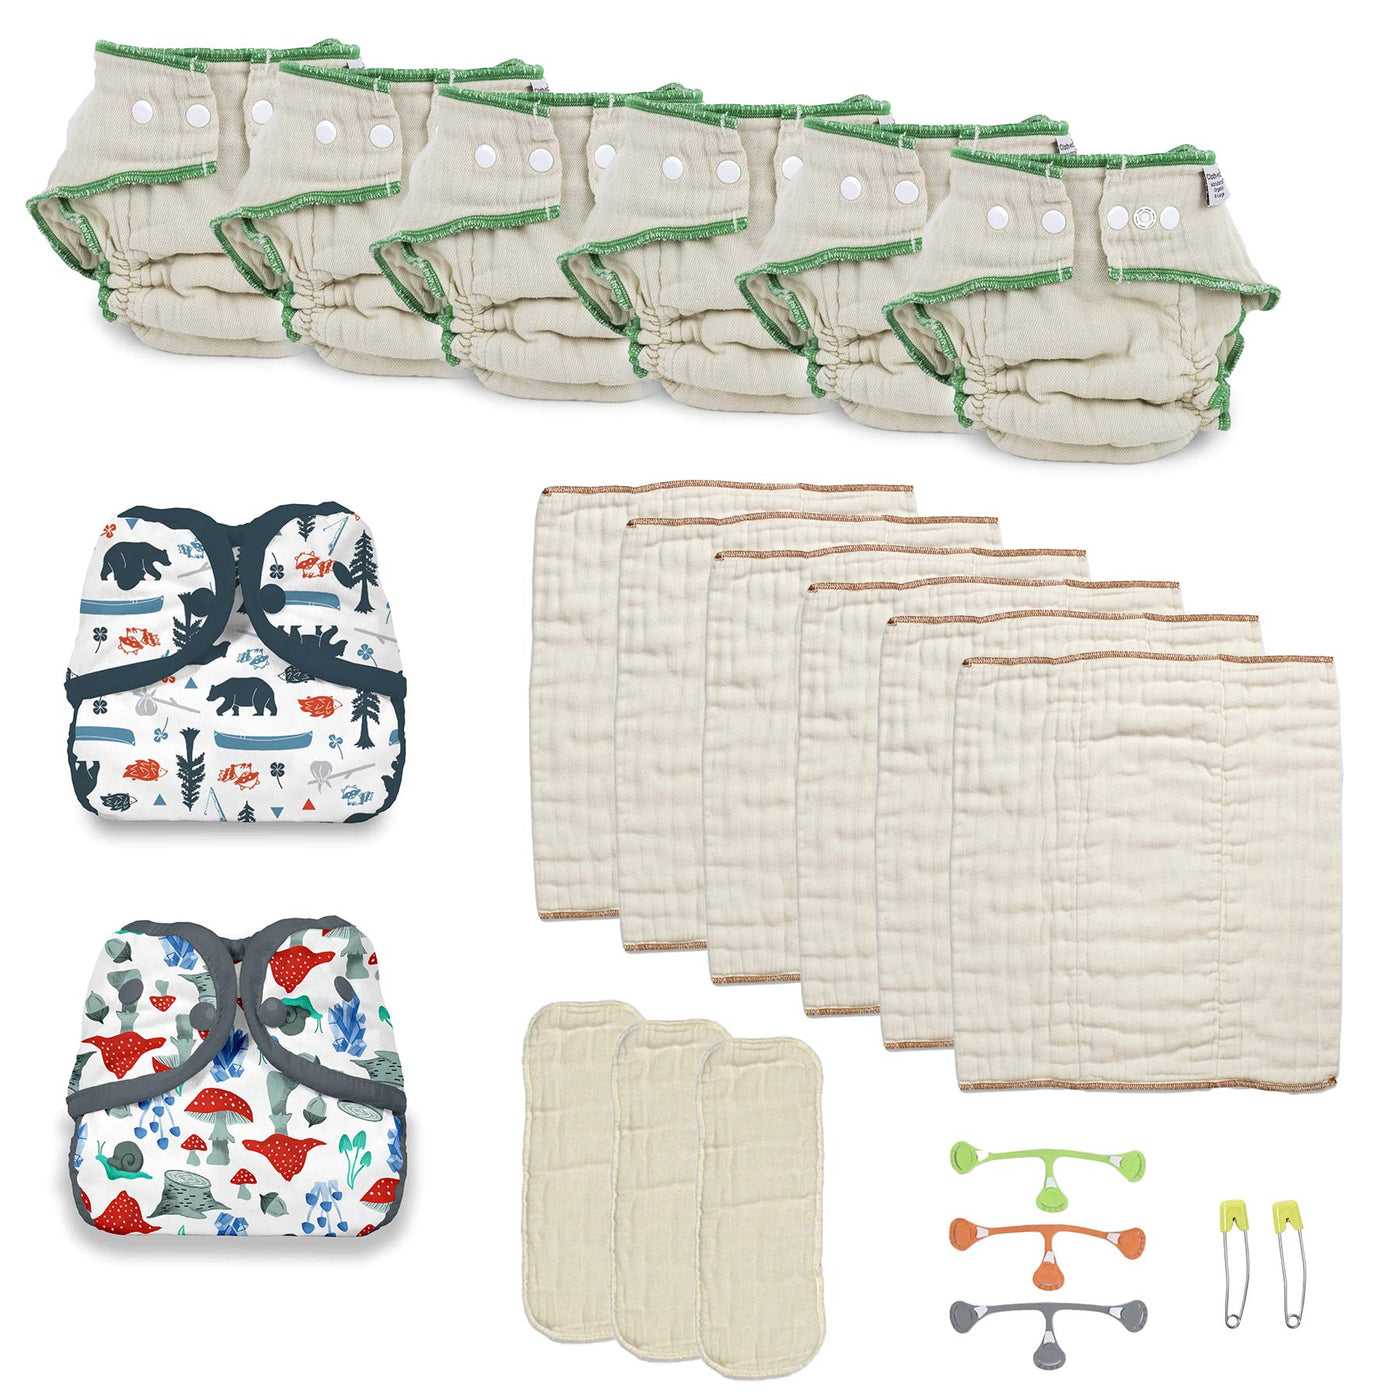 cloth diaper kit for a toddler boy